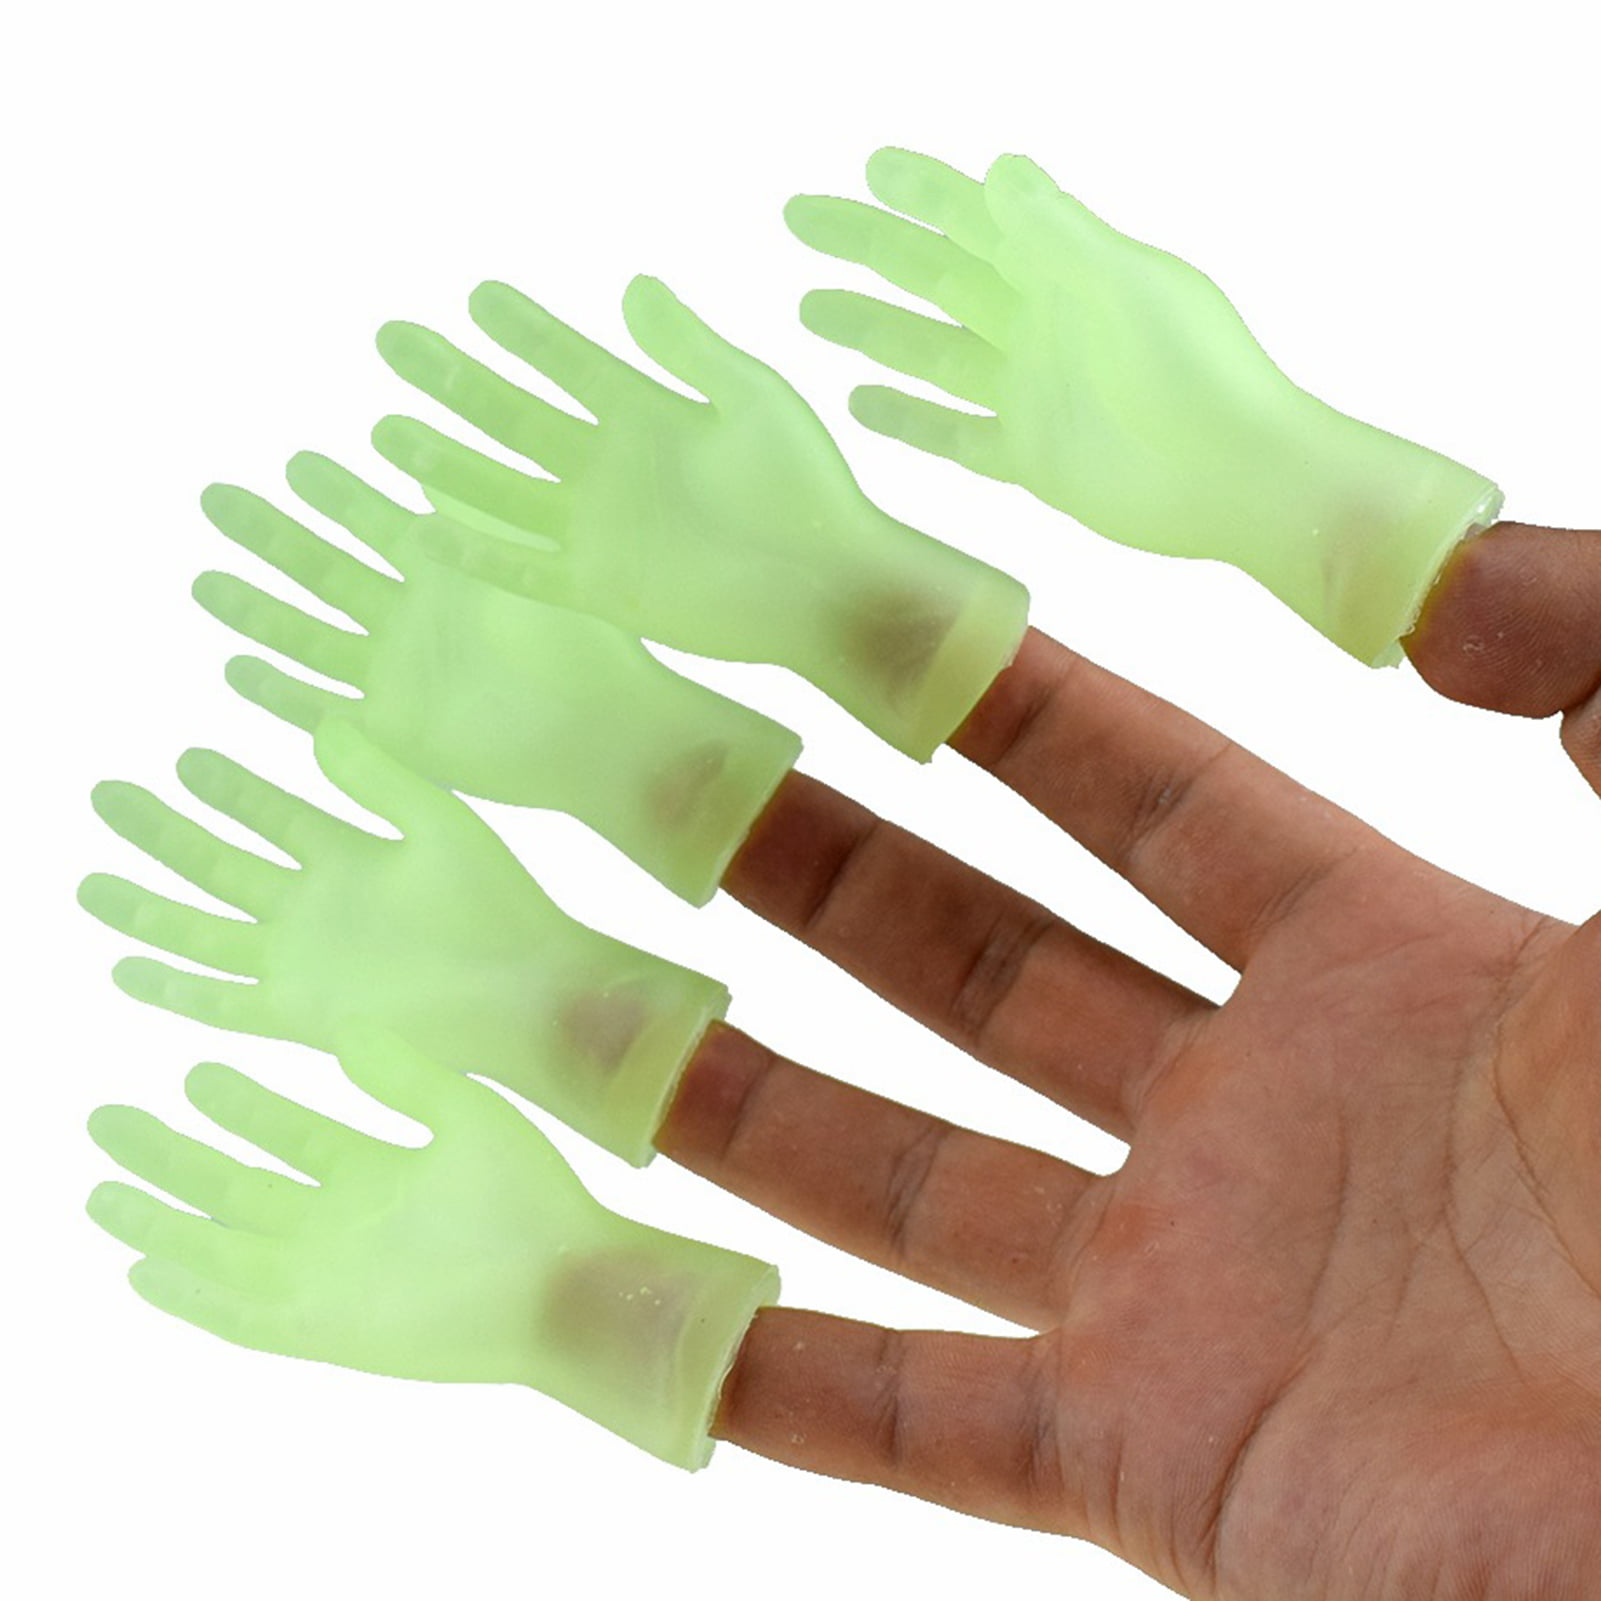 show original title Details about   2St Funny Simulation Left Right Mini Hands Finger Sleeves Toy S2D8